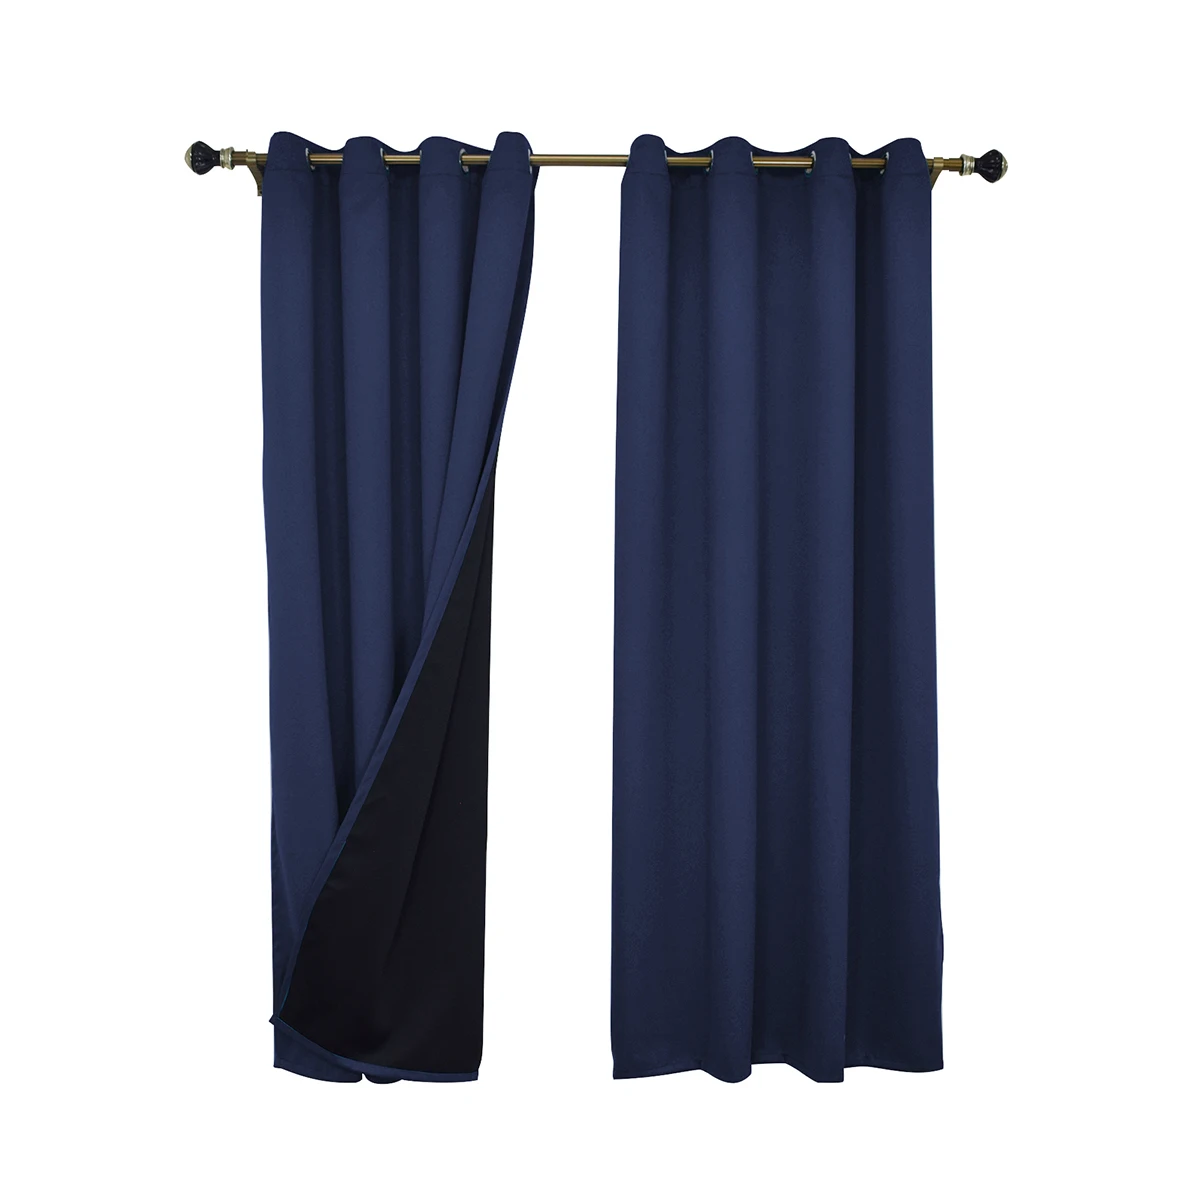 100% Thermal Blackout Curtains For Bedroom Winter Insulating Curtain With Liner Living Room Grommet Drapes Blackout Treatment 